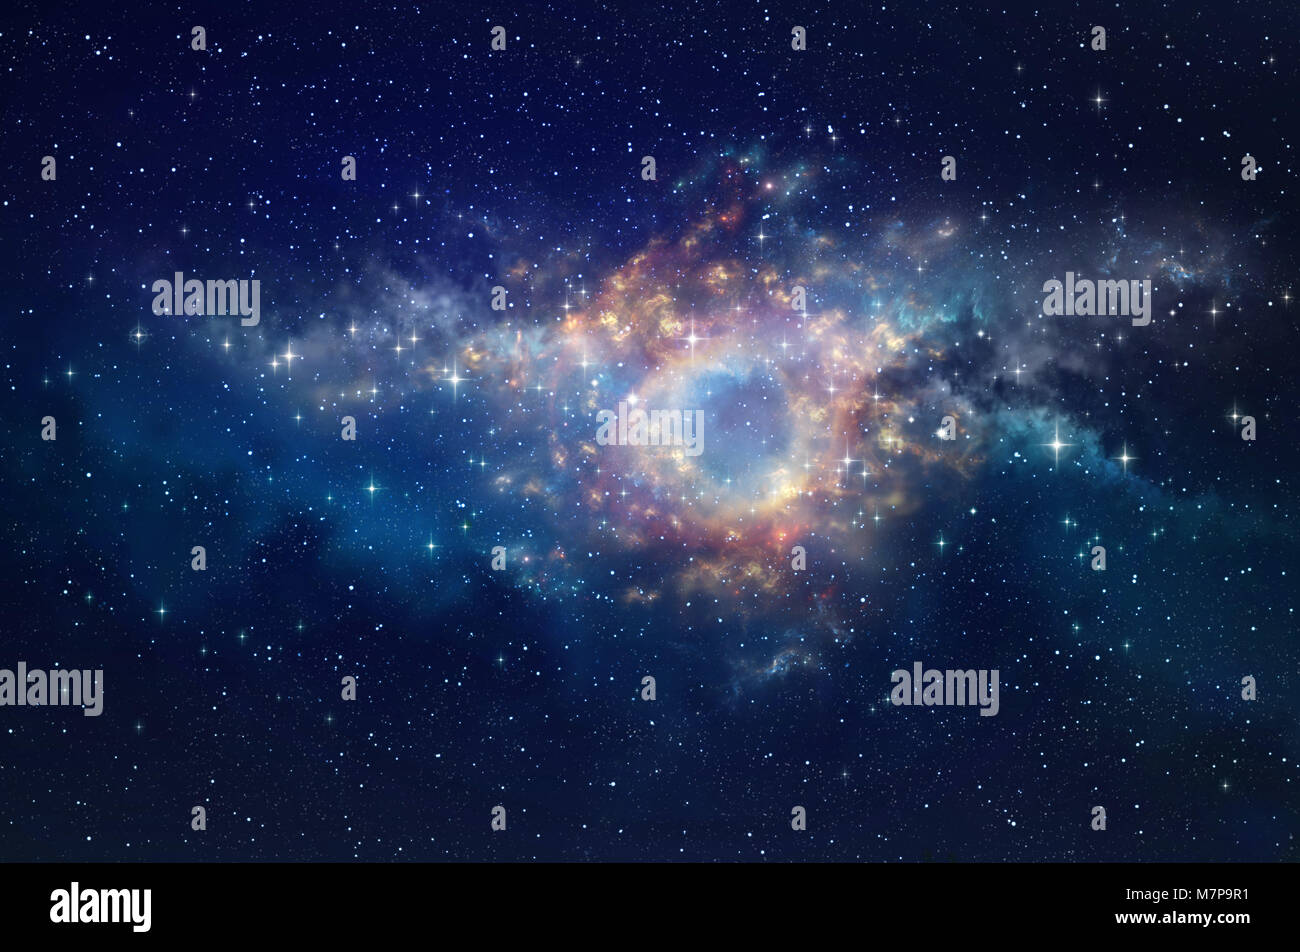 Galaxies, star clusters and nebula in deep space. Universe background in high resolution. Stock Photo